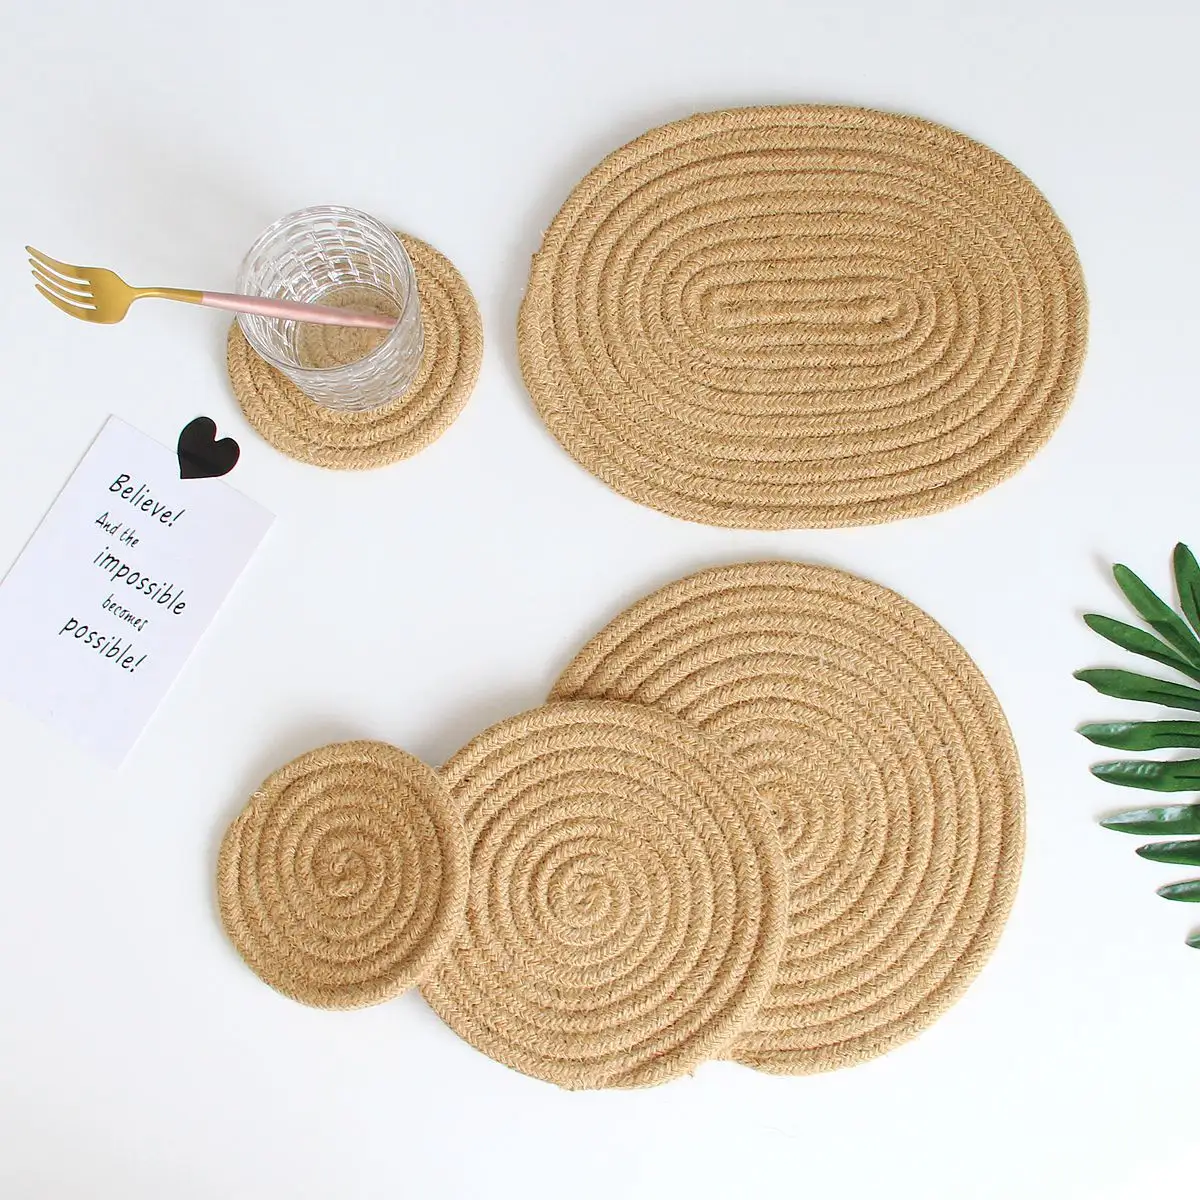 Cup Coasters Dining Table Mat Heat resistant Holder Hand Woven jute Flax oval Wicker Drink Coaster cotton linen Placemats